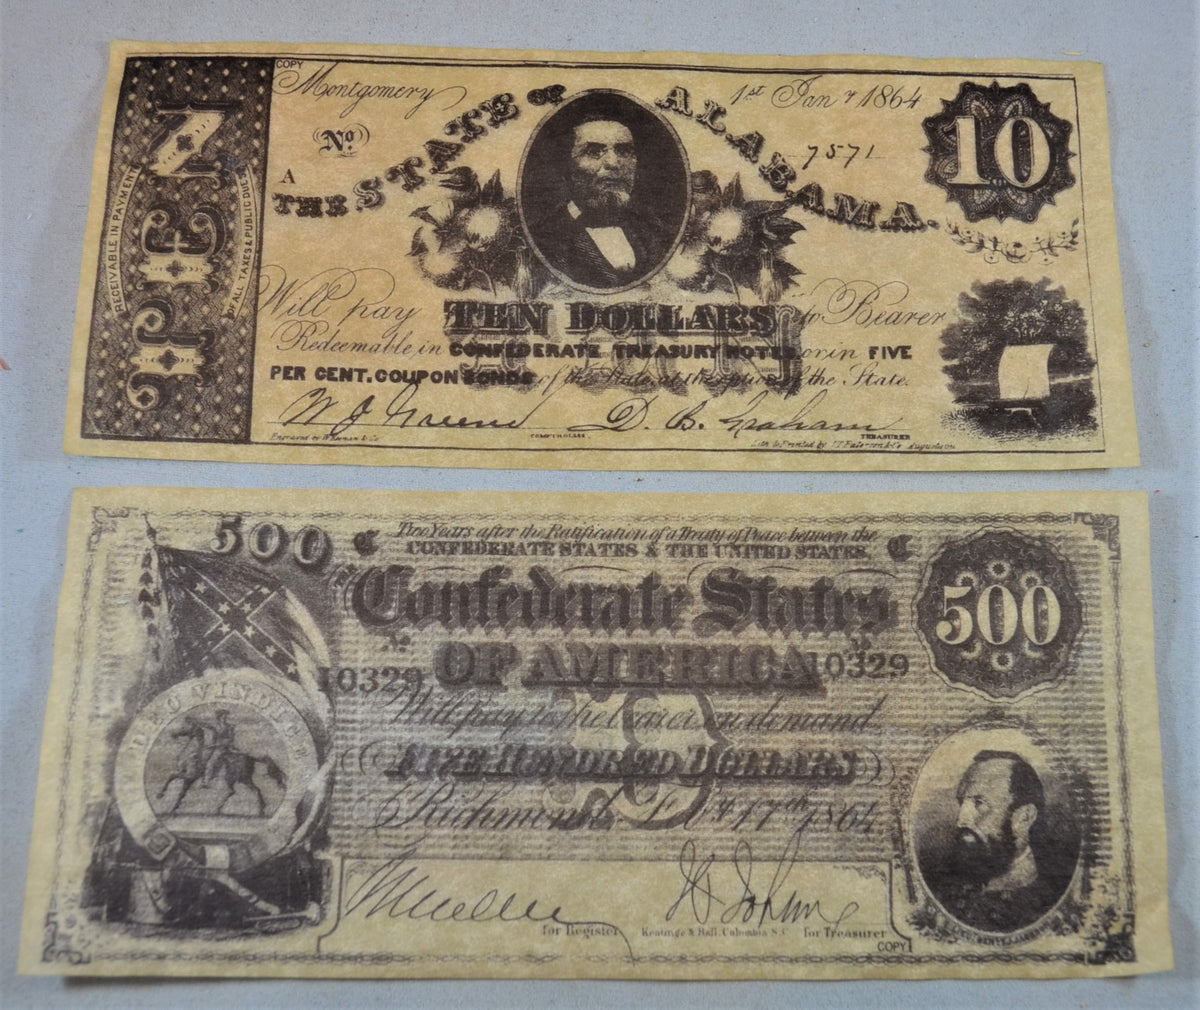 2.1.AND .75 Cen CIVIL WAR 2nd CONFEDERATE CURRENCY BATTLE SET REPO $500.20.10 